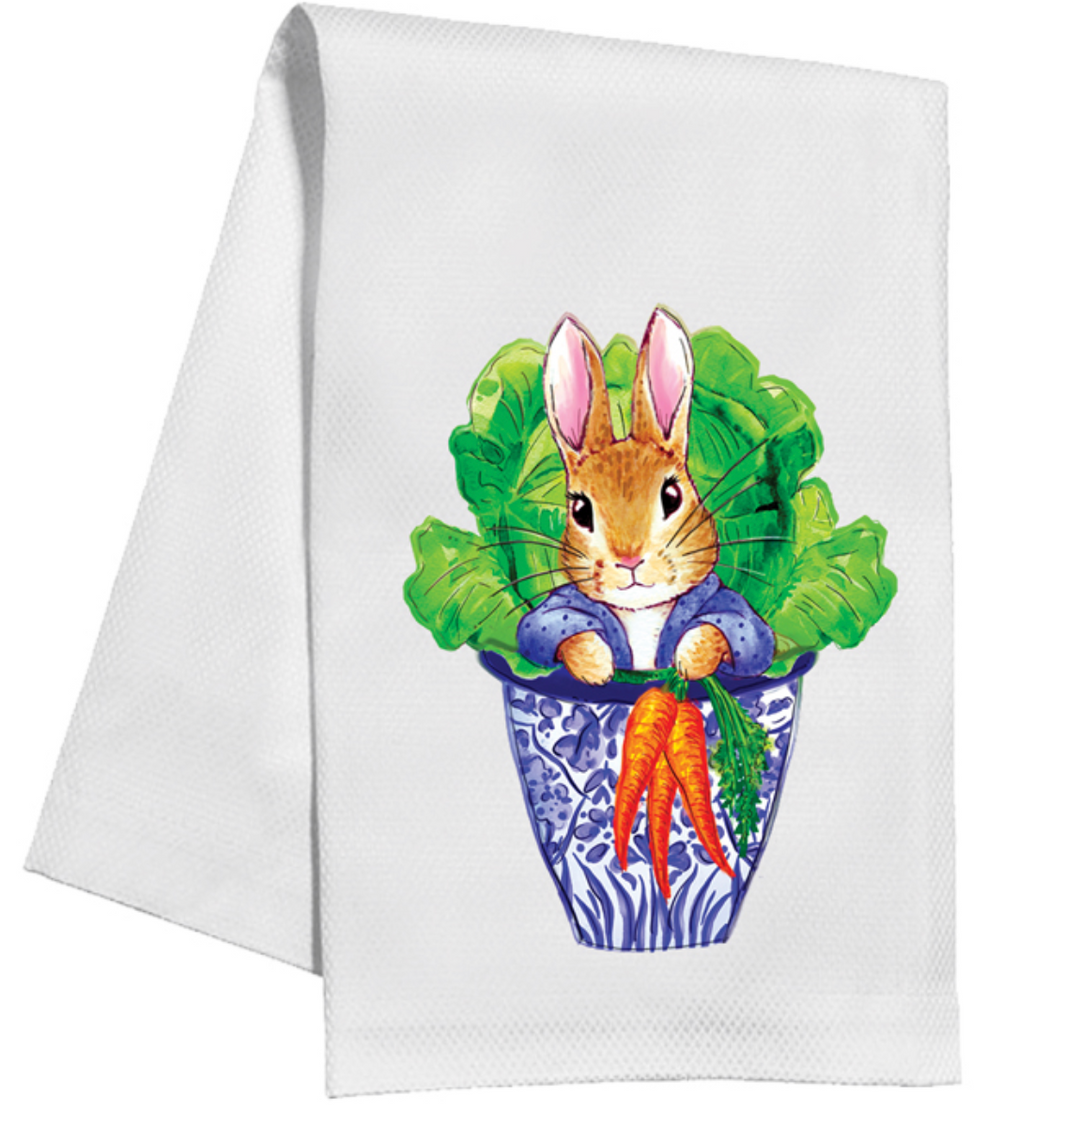 TOM TOM EASTER BUNNY IN CHINOISERIE POT HOLDING CARROTS KITCHEN TOWEL